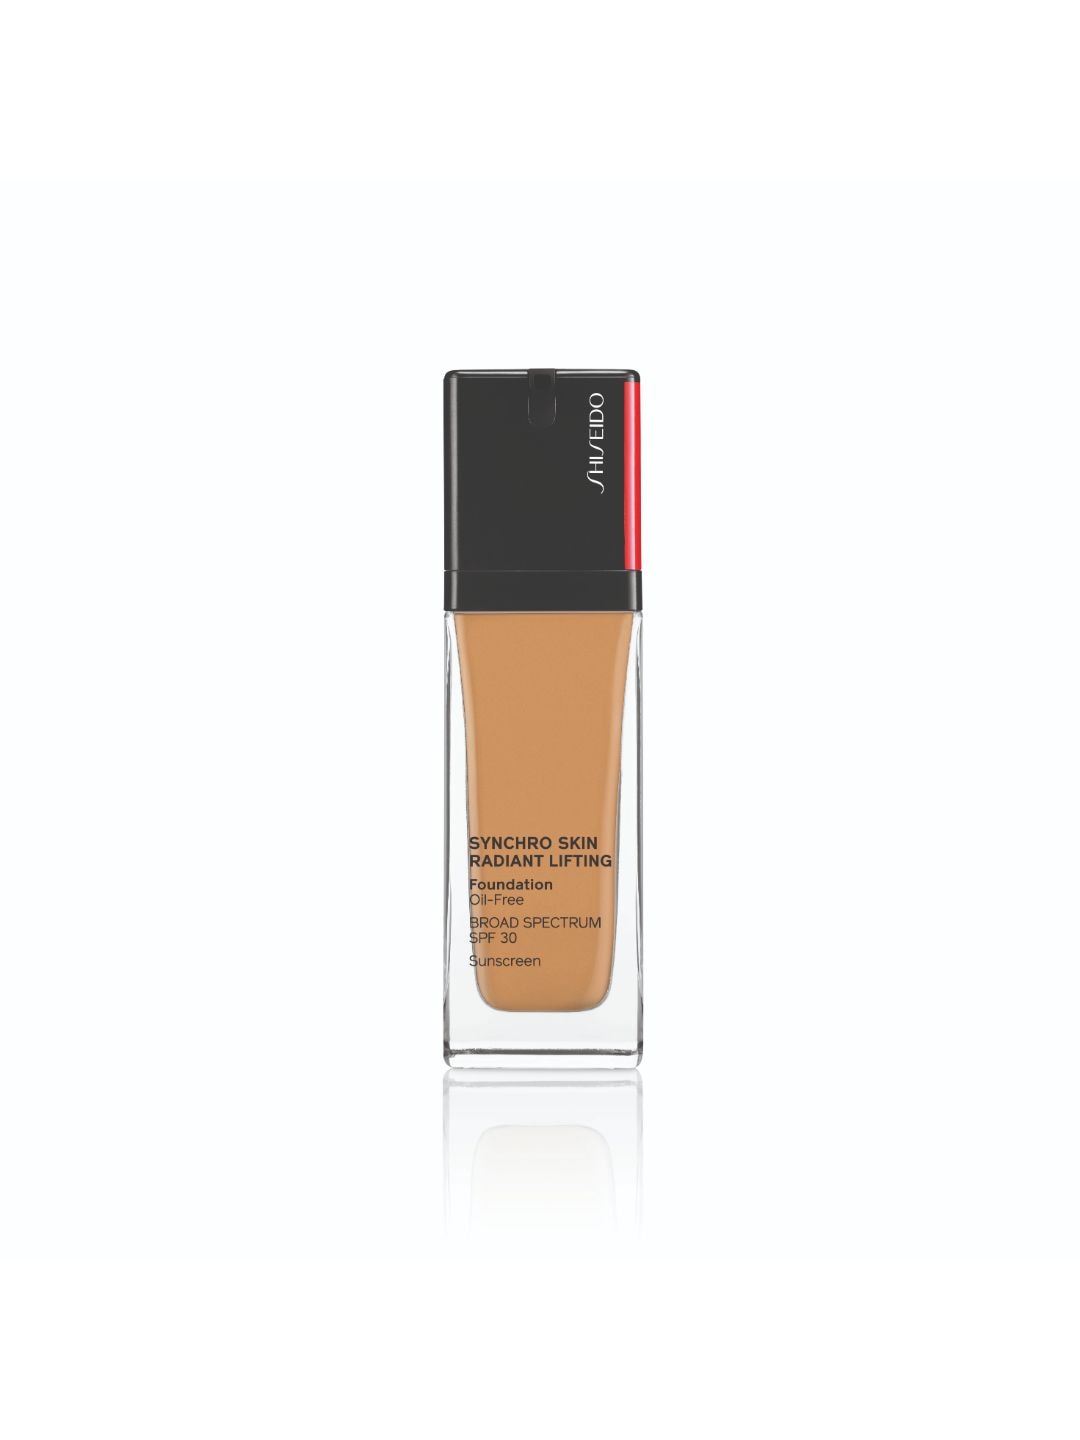 SHISEIDO Synchro Skin Radiant Lifting Foundation with SPF 30 - Citrine 360 Price in India